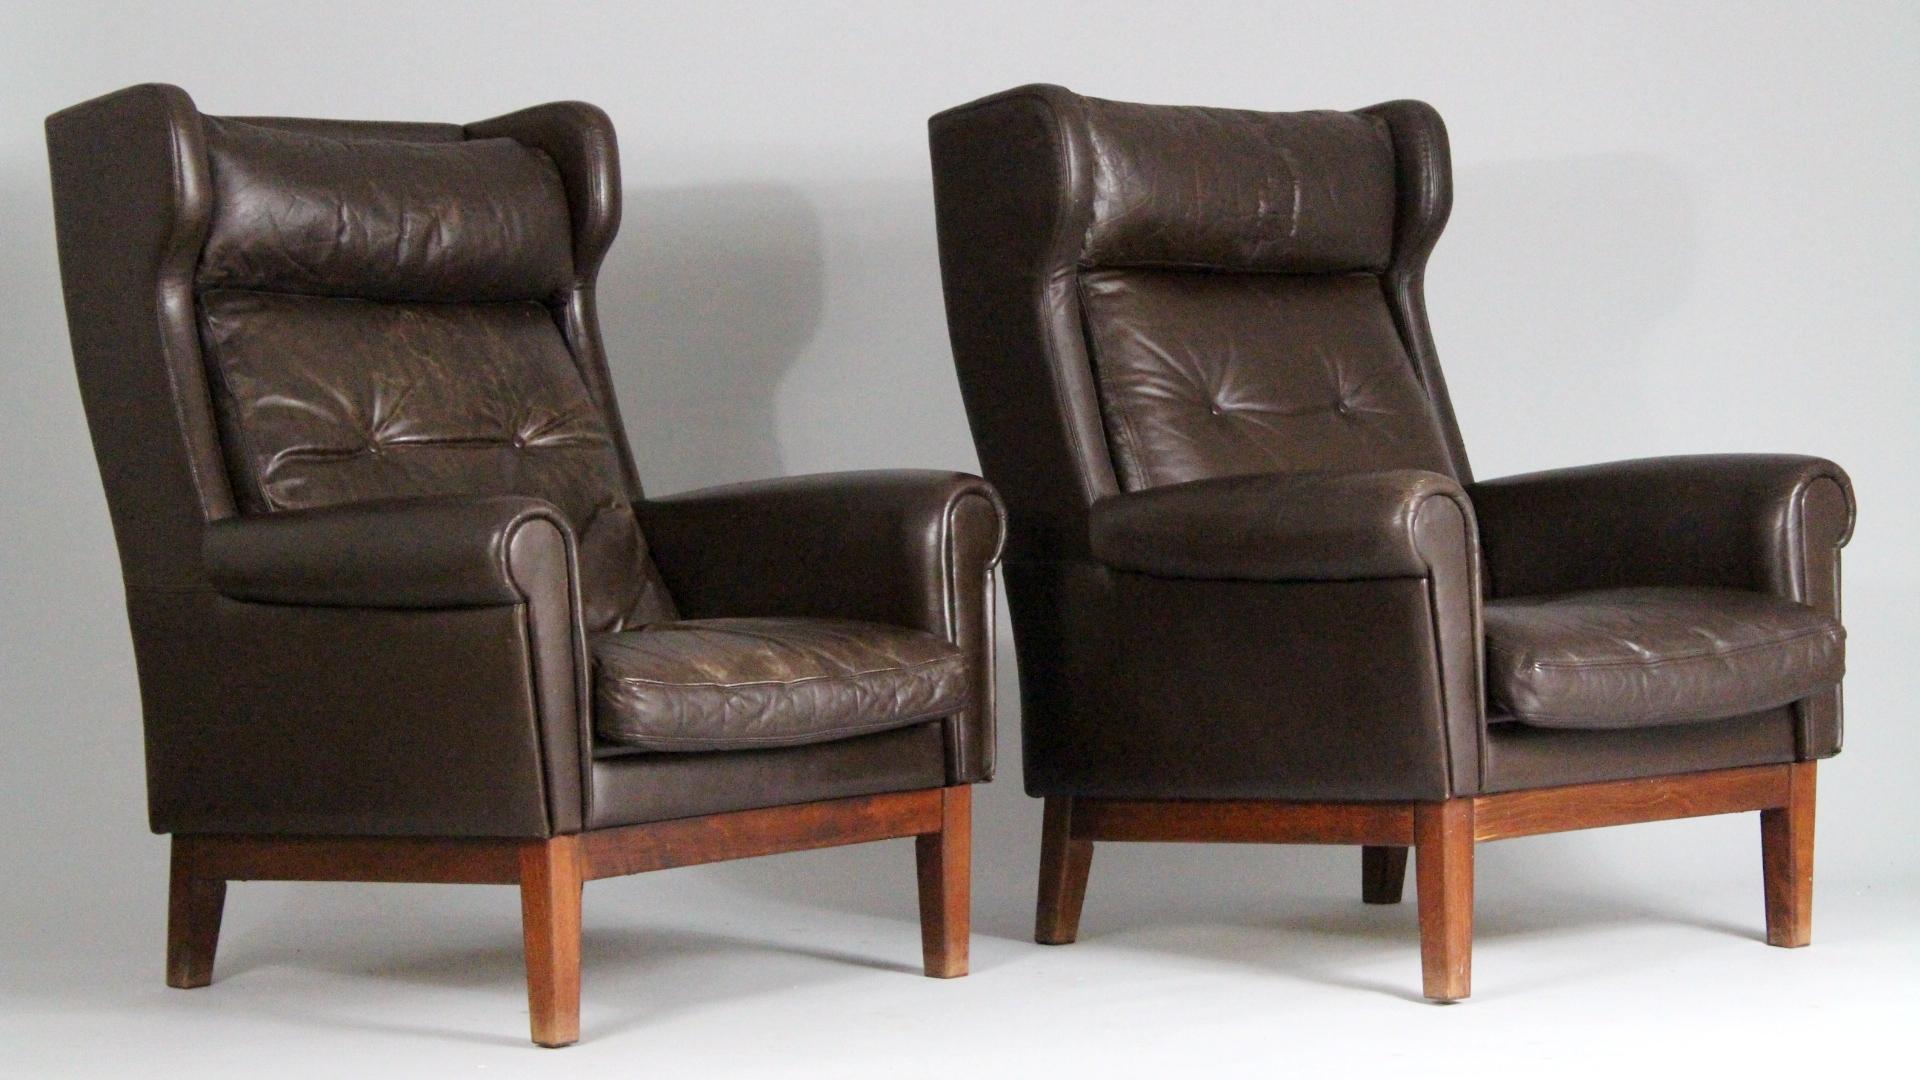 Pair of Scandinavian club chairs with well-worn original leather upholstery from the 1970s. Good original condition with nice patina.